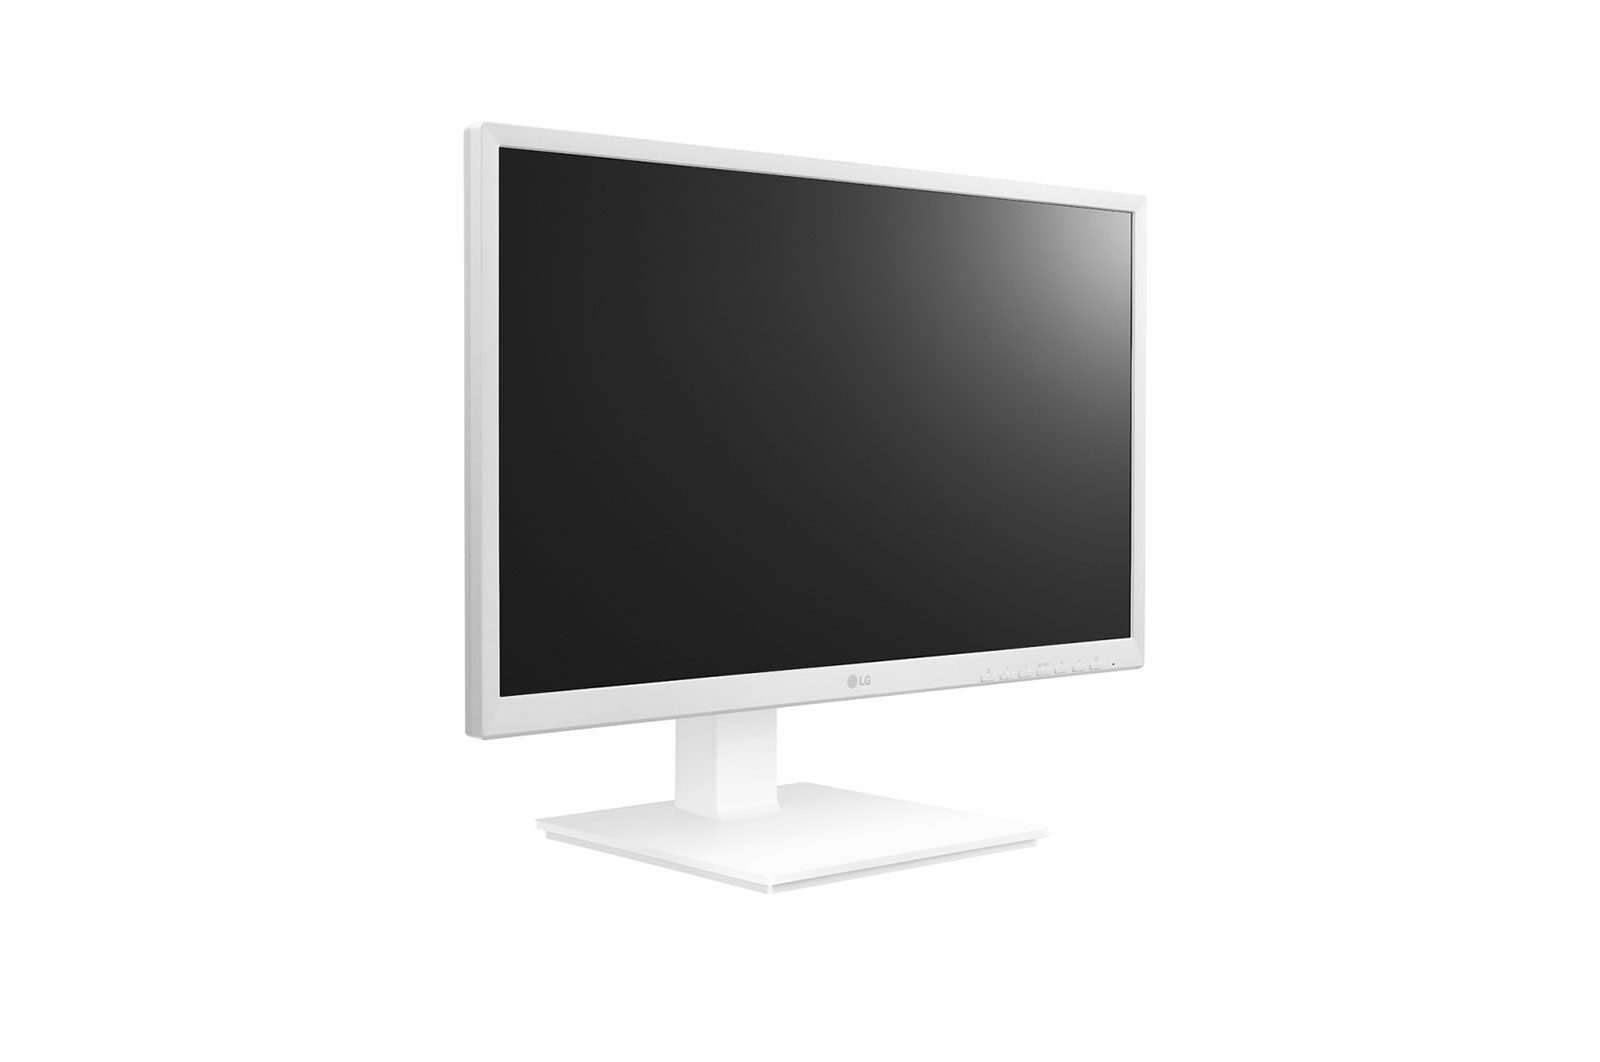 24” All-in-One FHD IPS Thin Client